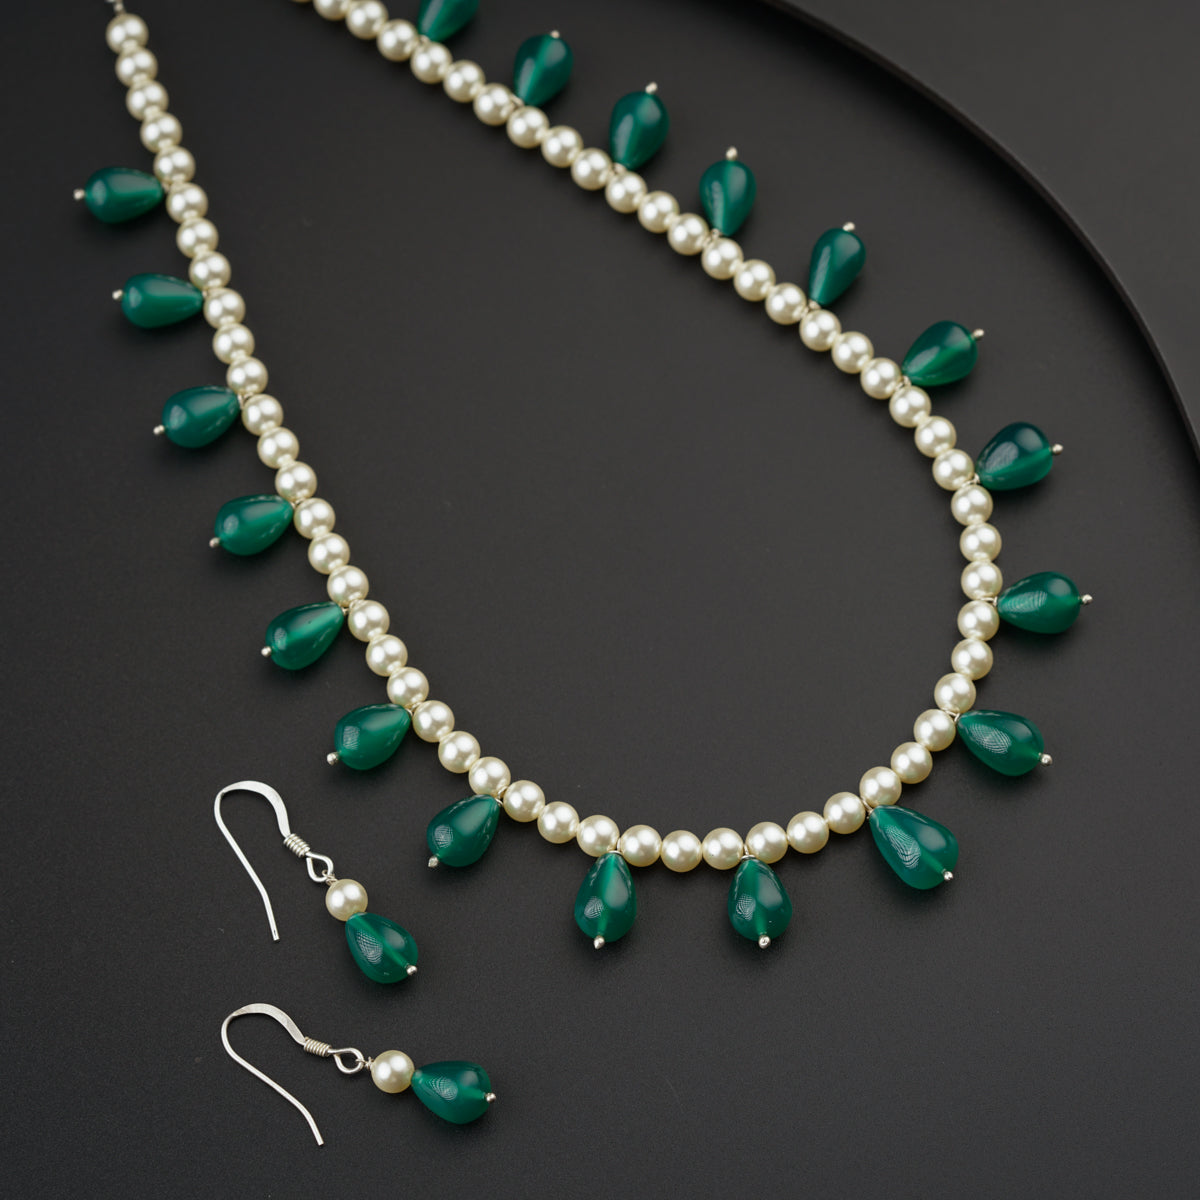 a necklace and earring set with pearls and green stones